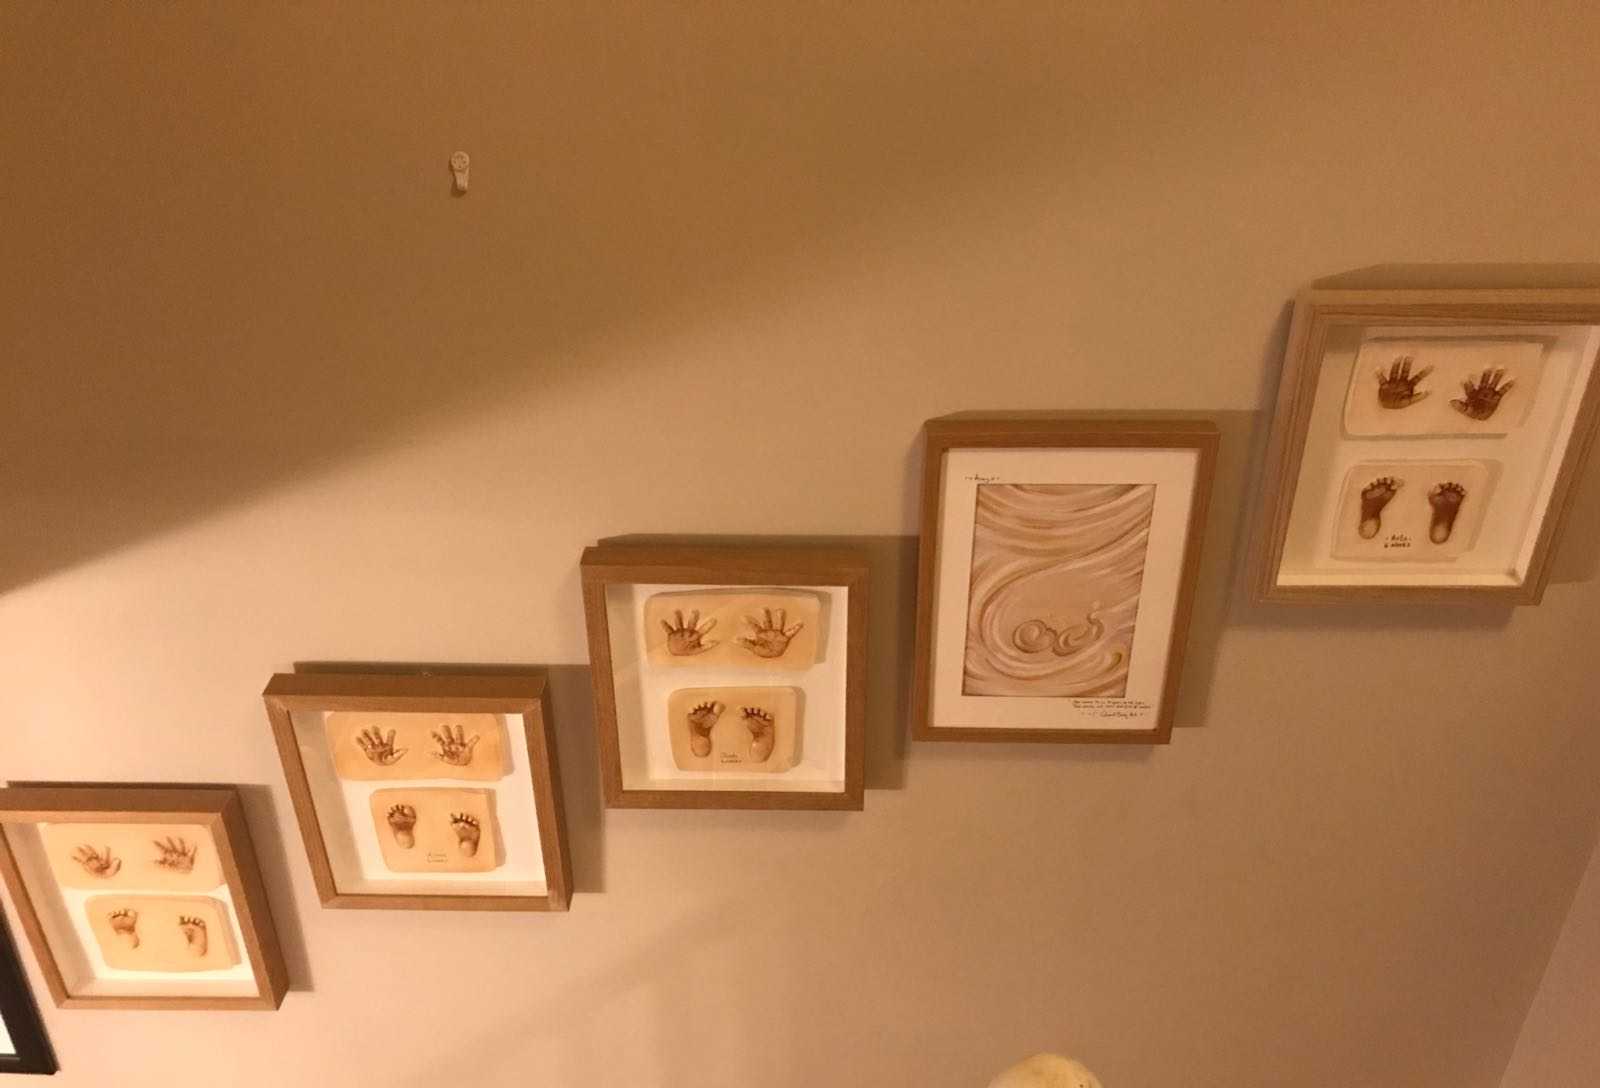 Framed ultrasound painting in hallway next to framed baby hand and foot prints